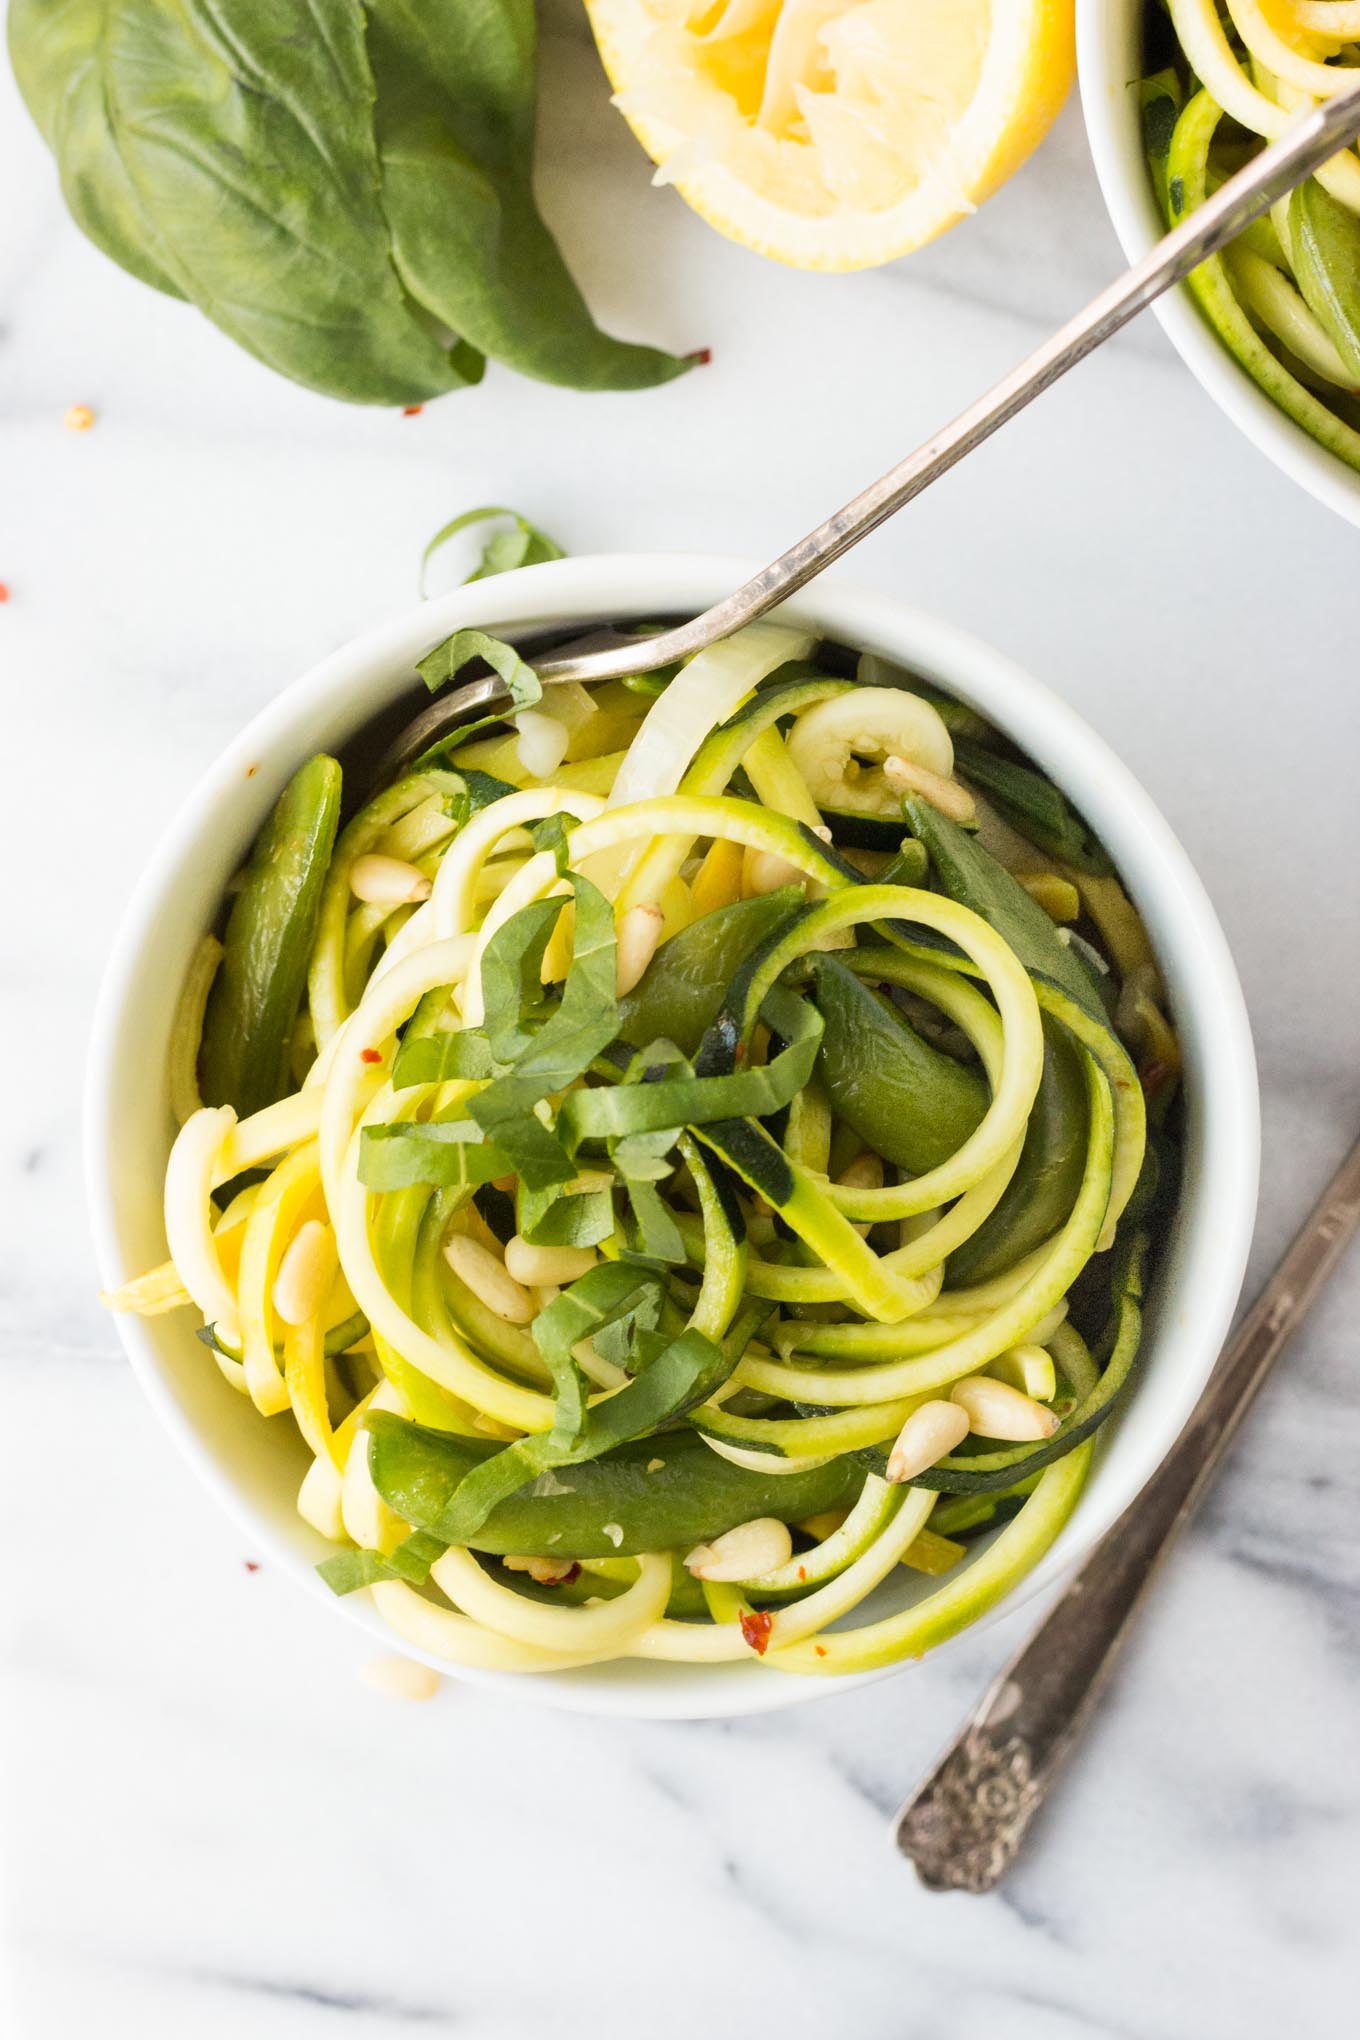 Summer Zucchini Noodles - a refreshing and healthy recipe that's perfect as a side or meal! // Fork in the Kitchen